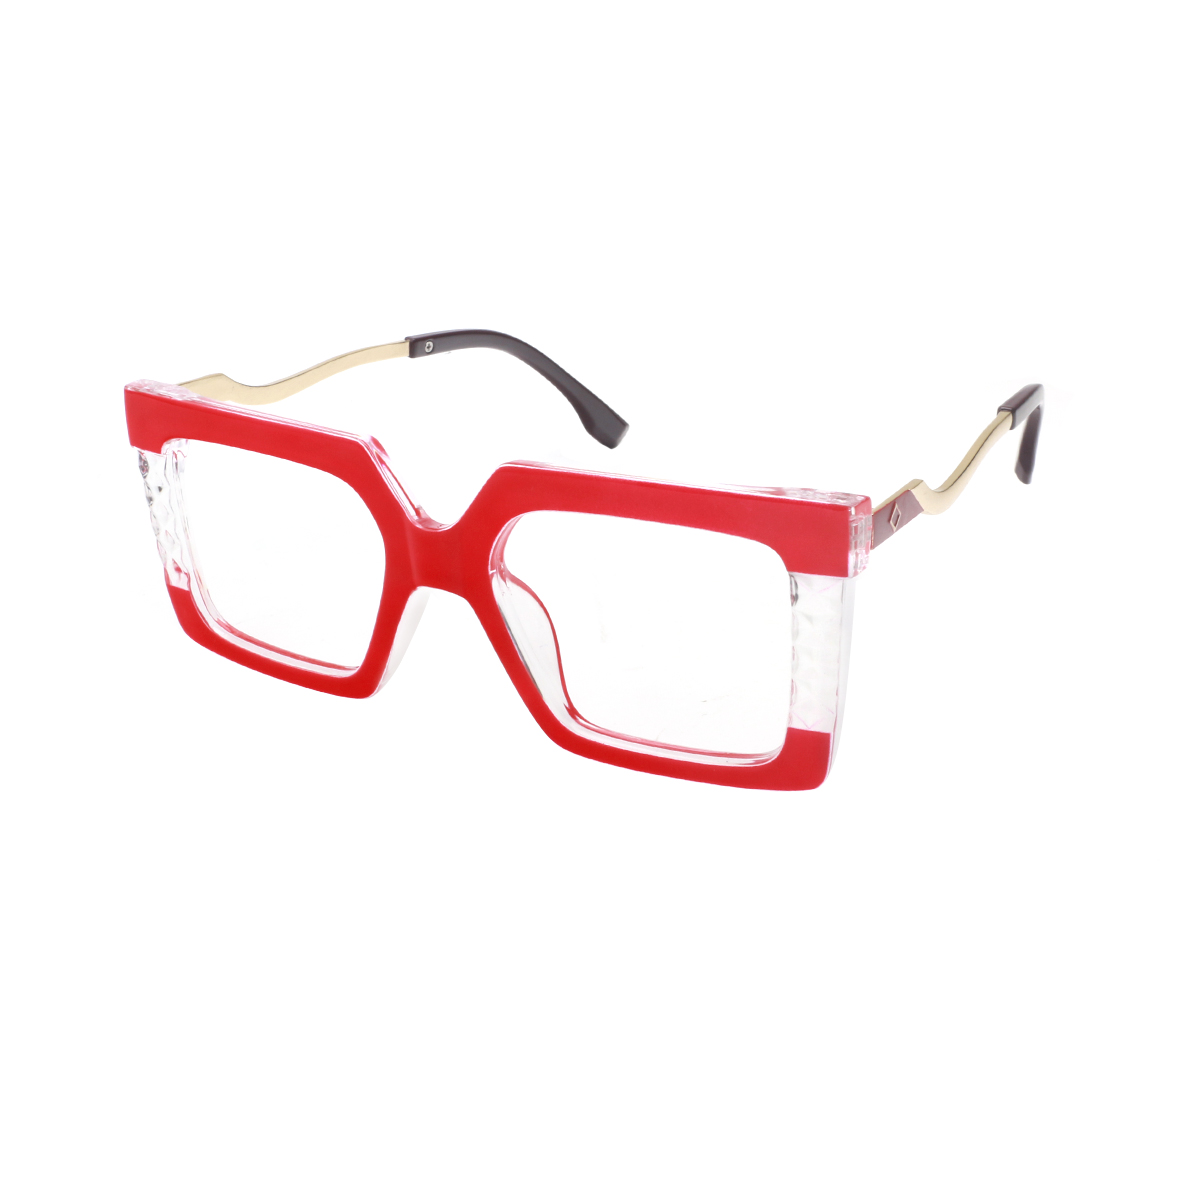 Sicyon - Square Red Reading Glasses for Women